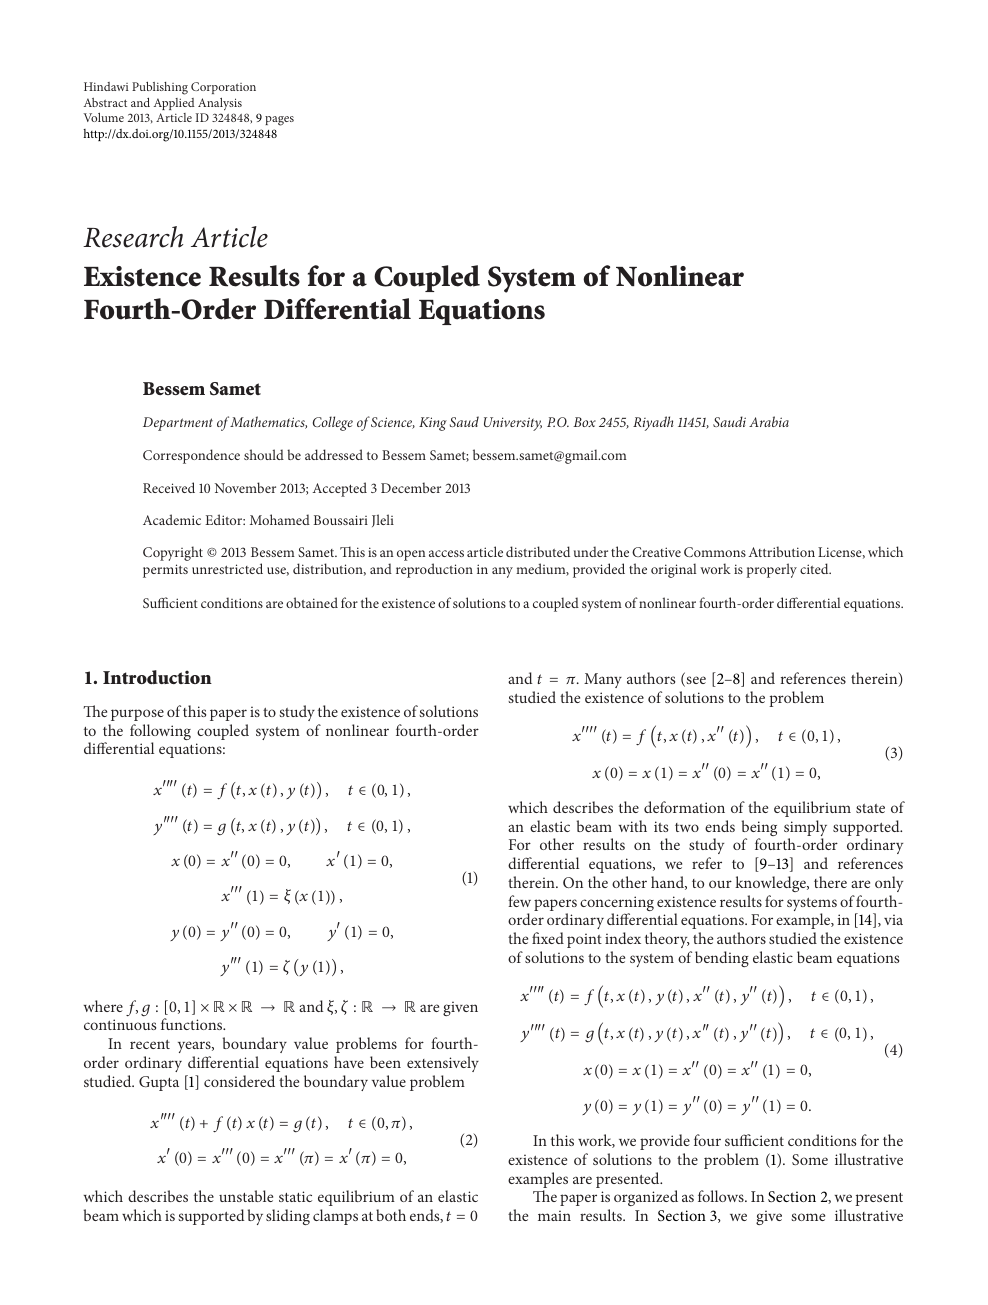 Existence Results For A Coupled System Of Nonlinear Fourth Order Differential Equations Topic Of Research Paper In Mathematics Download Scholarly Article Pdf And Read For Free On Cyberleninka Open Science Hub